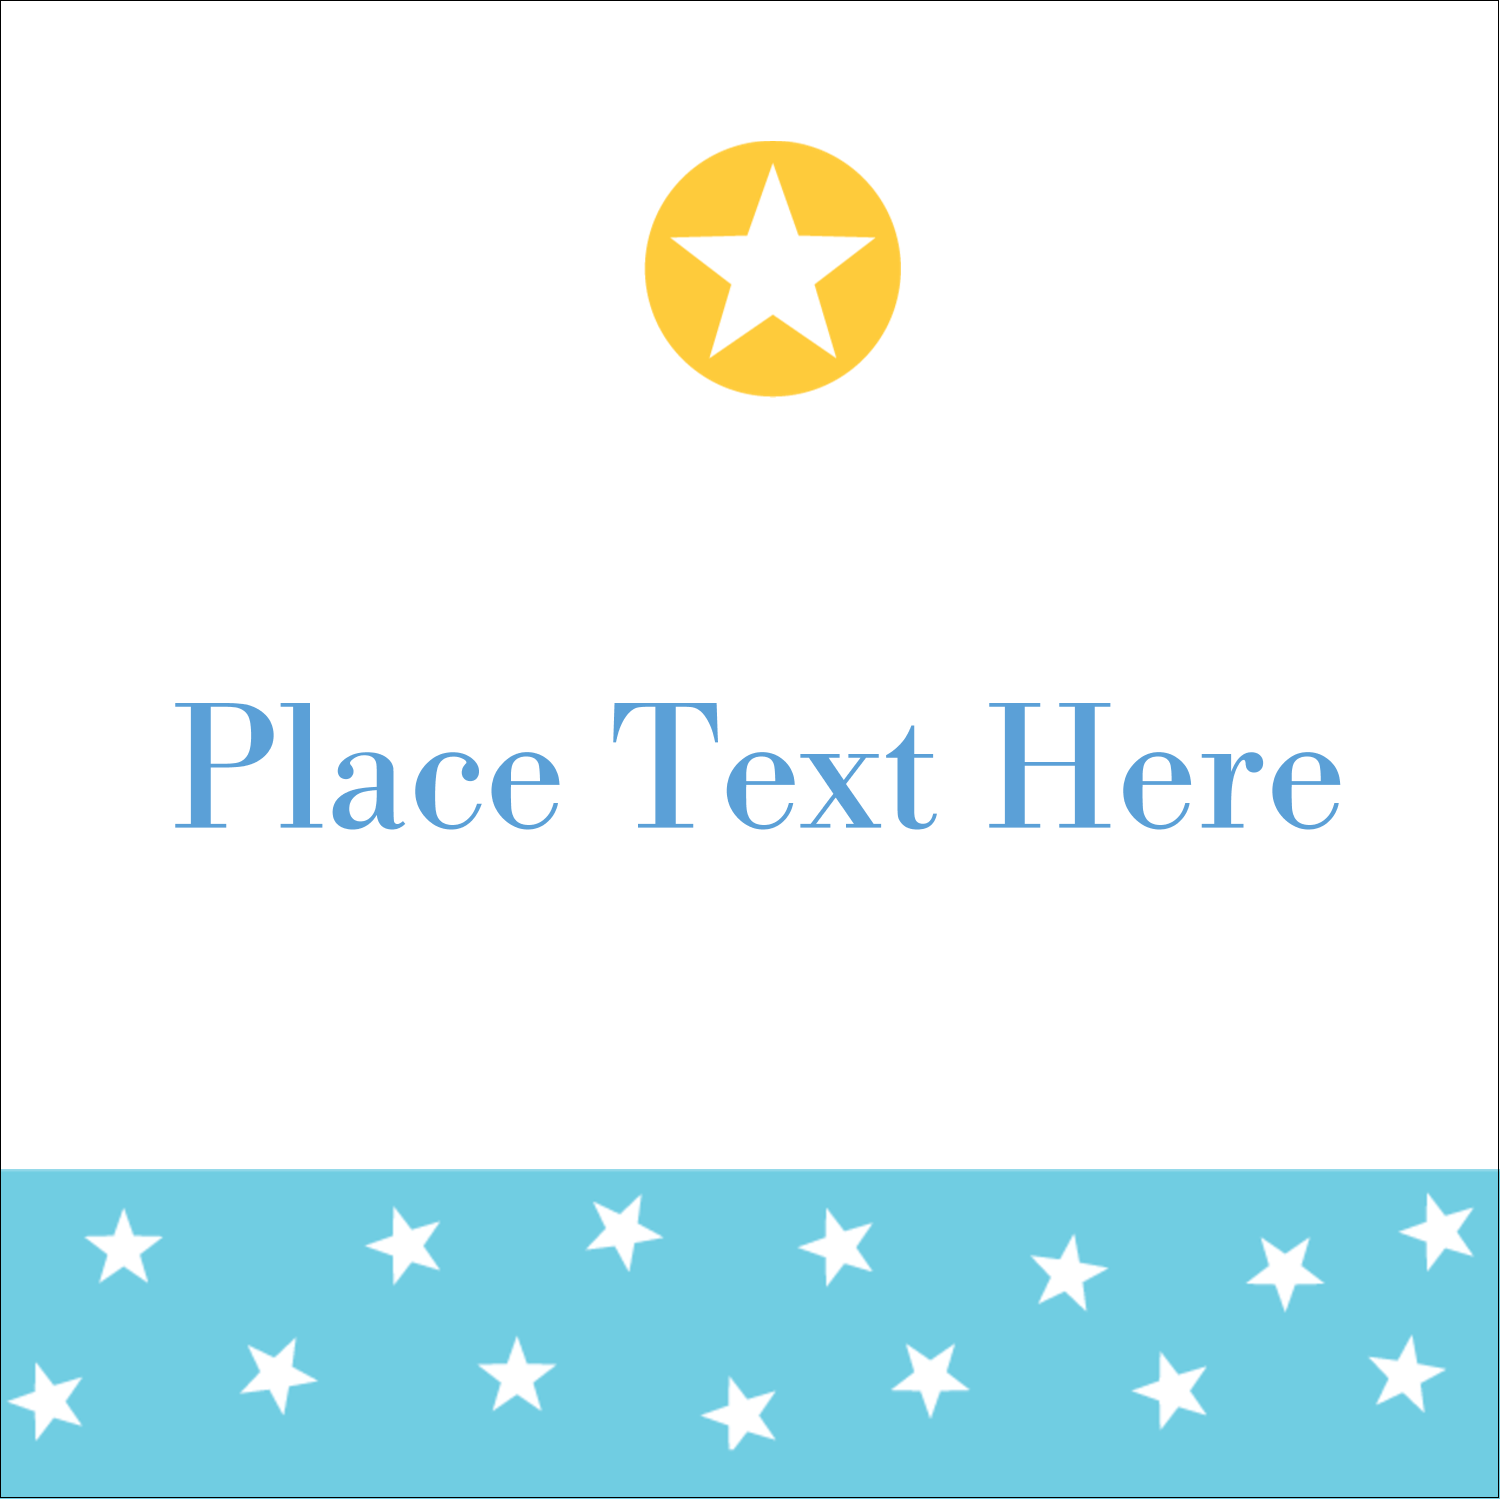 Looking Square Blue Yellow Stars Logo - Blue Yellow Stars predesigned template for your next fun creative